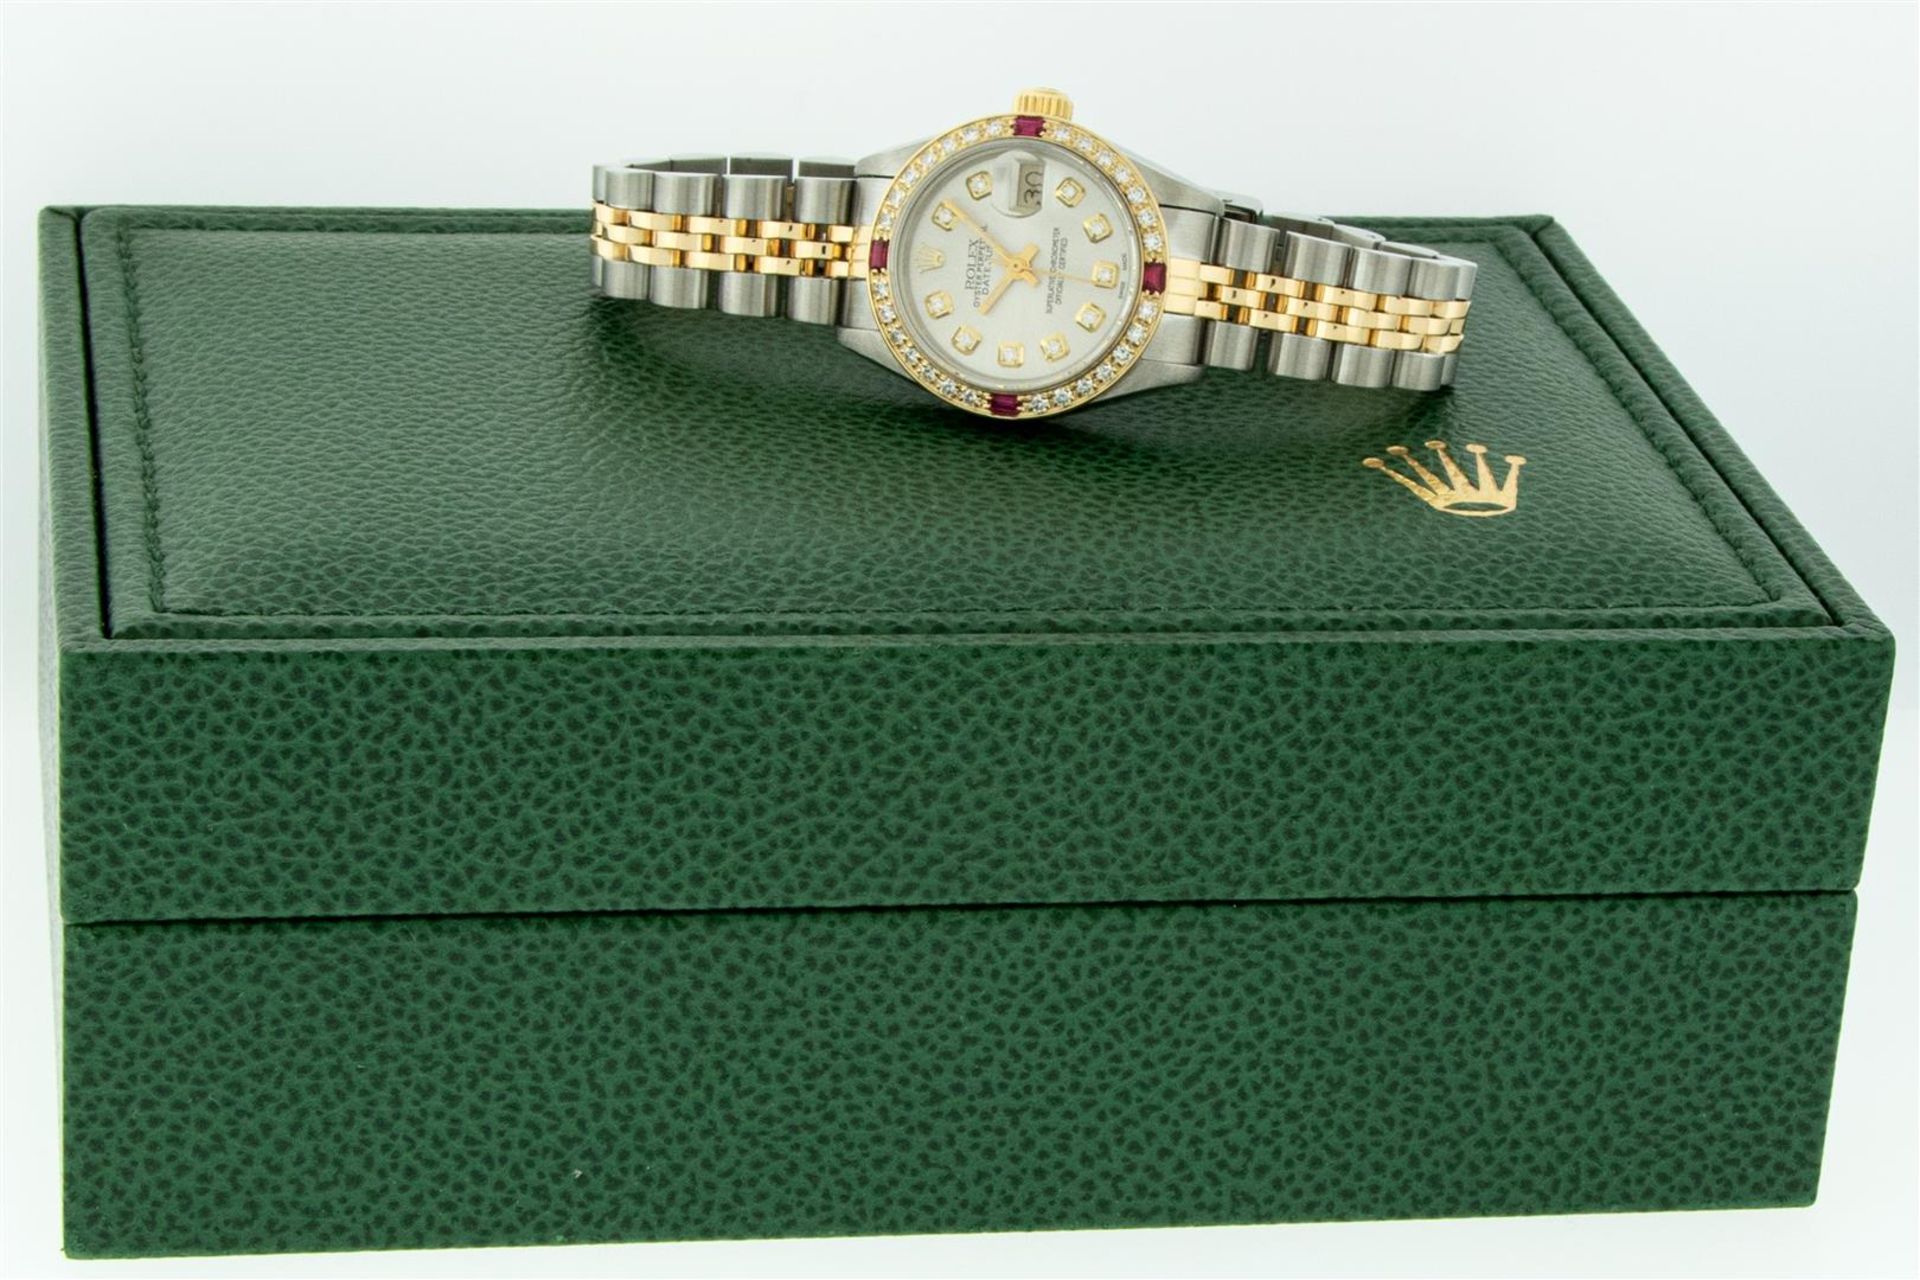 Rolex Ladies 2 Tone Silver Diamond & Ruby Oyster Perpetual Datejust Wristwatch T - Image 4 of 9